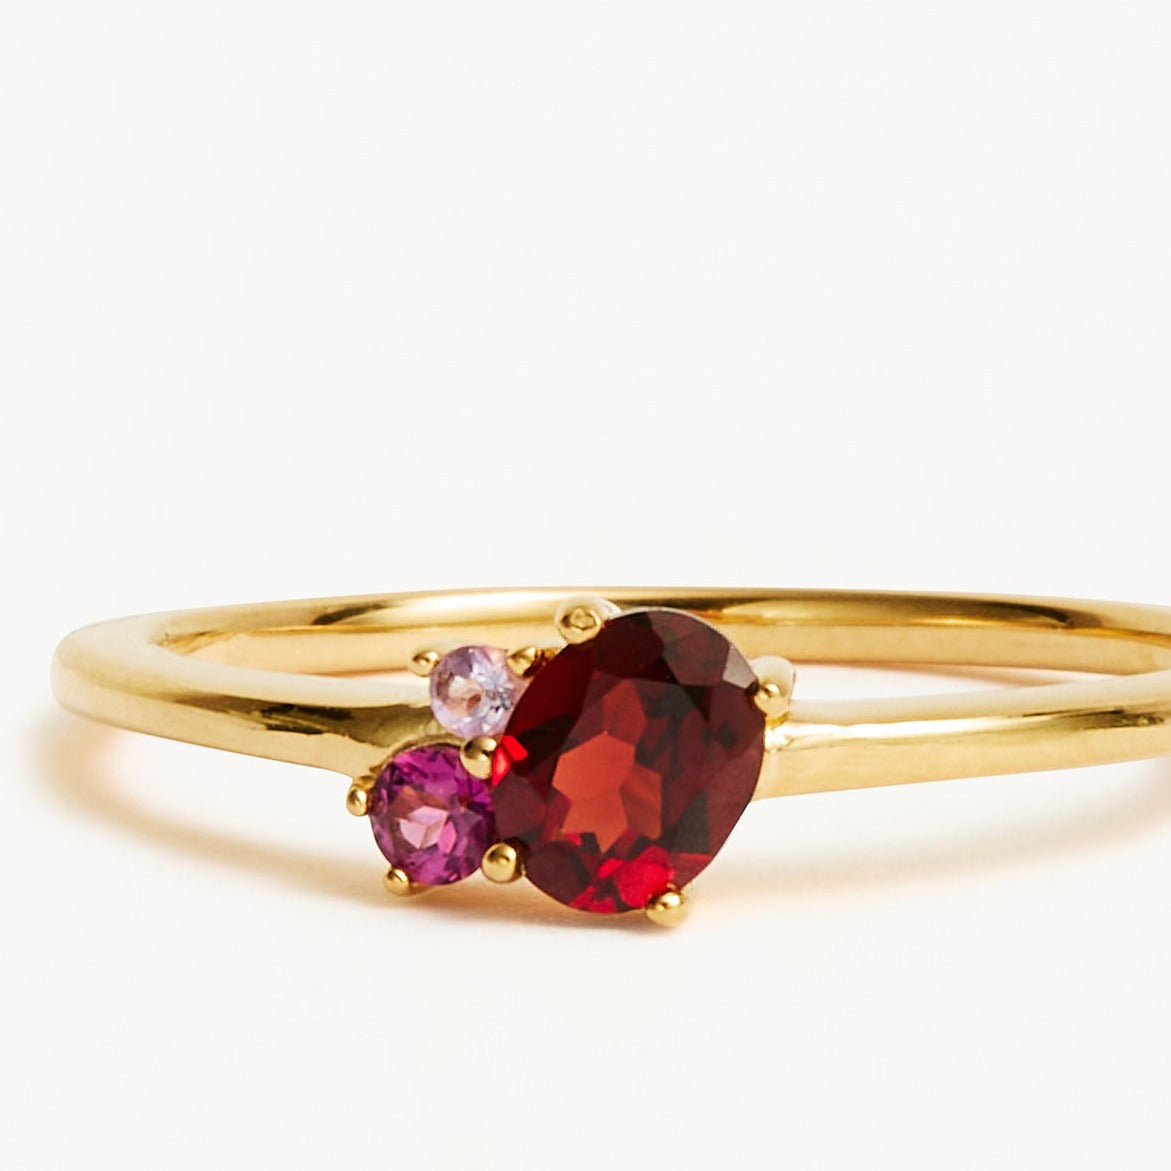 by-charlotte-18k-gold-vermeil-sterling-silver-kindred-january-birthstone-ring-gold-silver-3